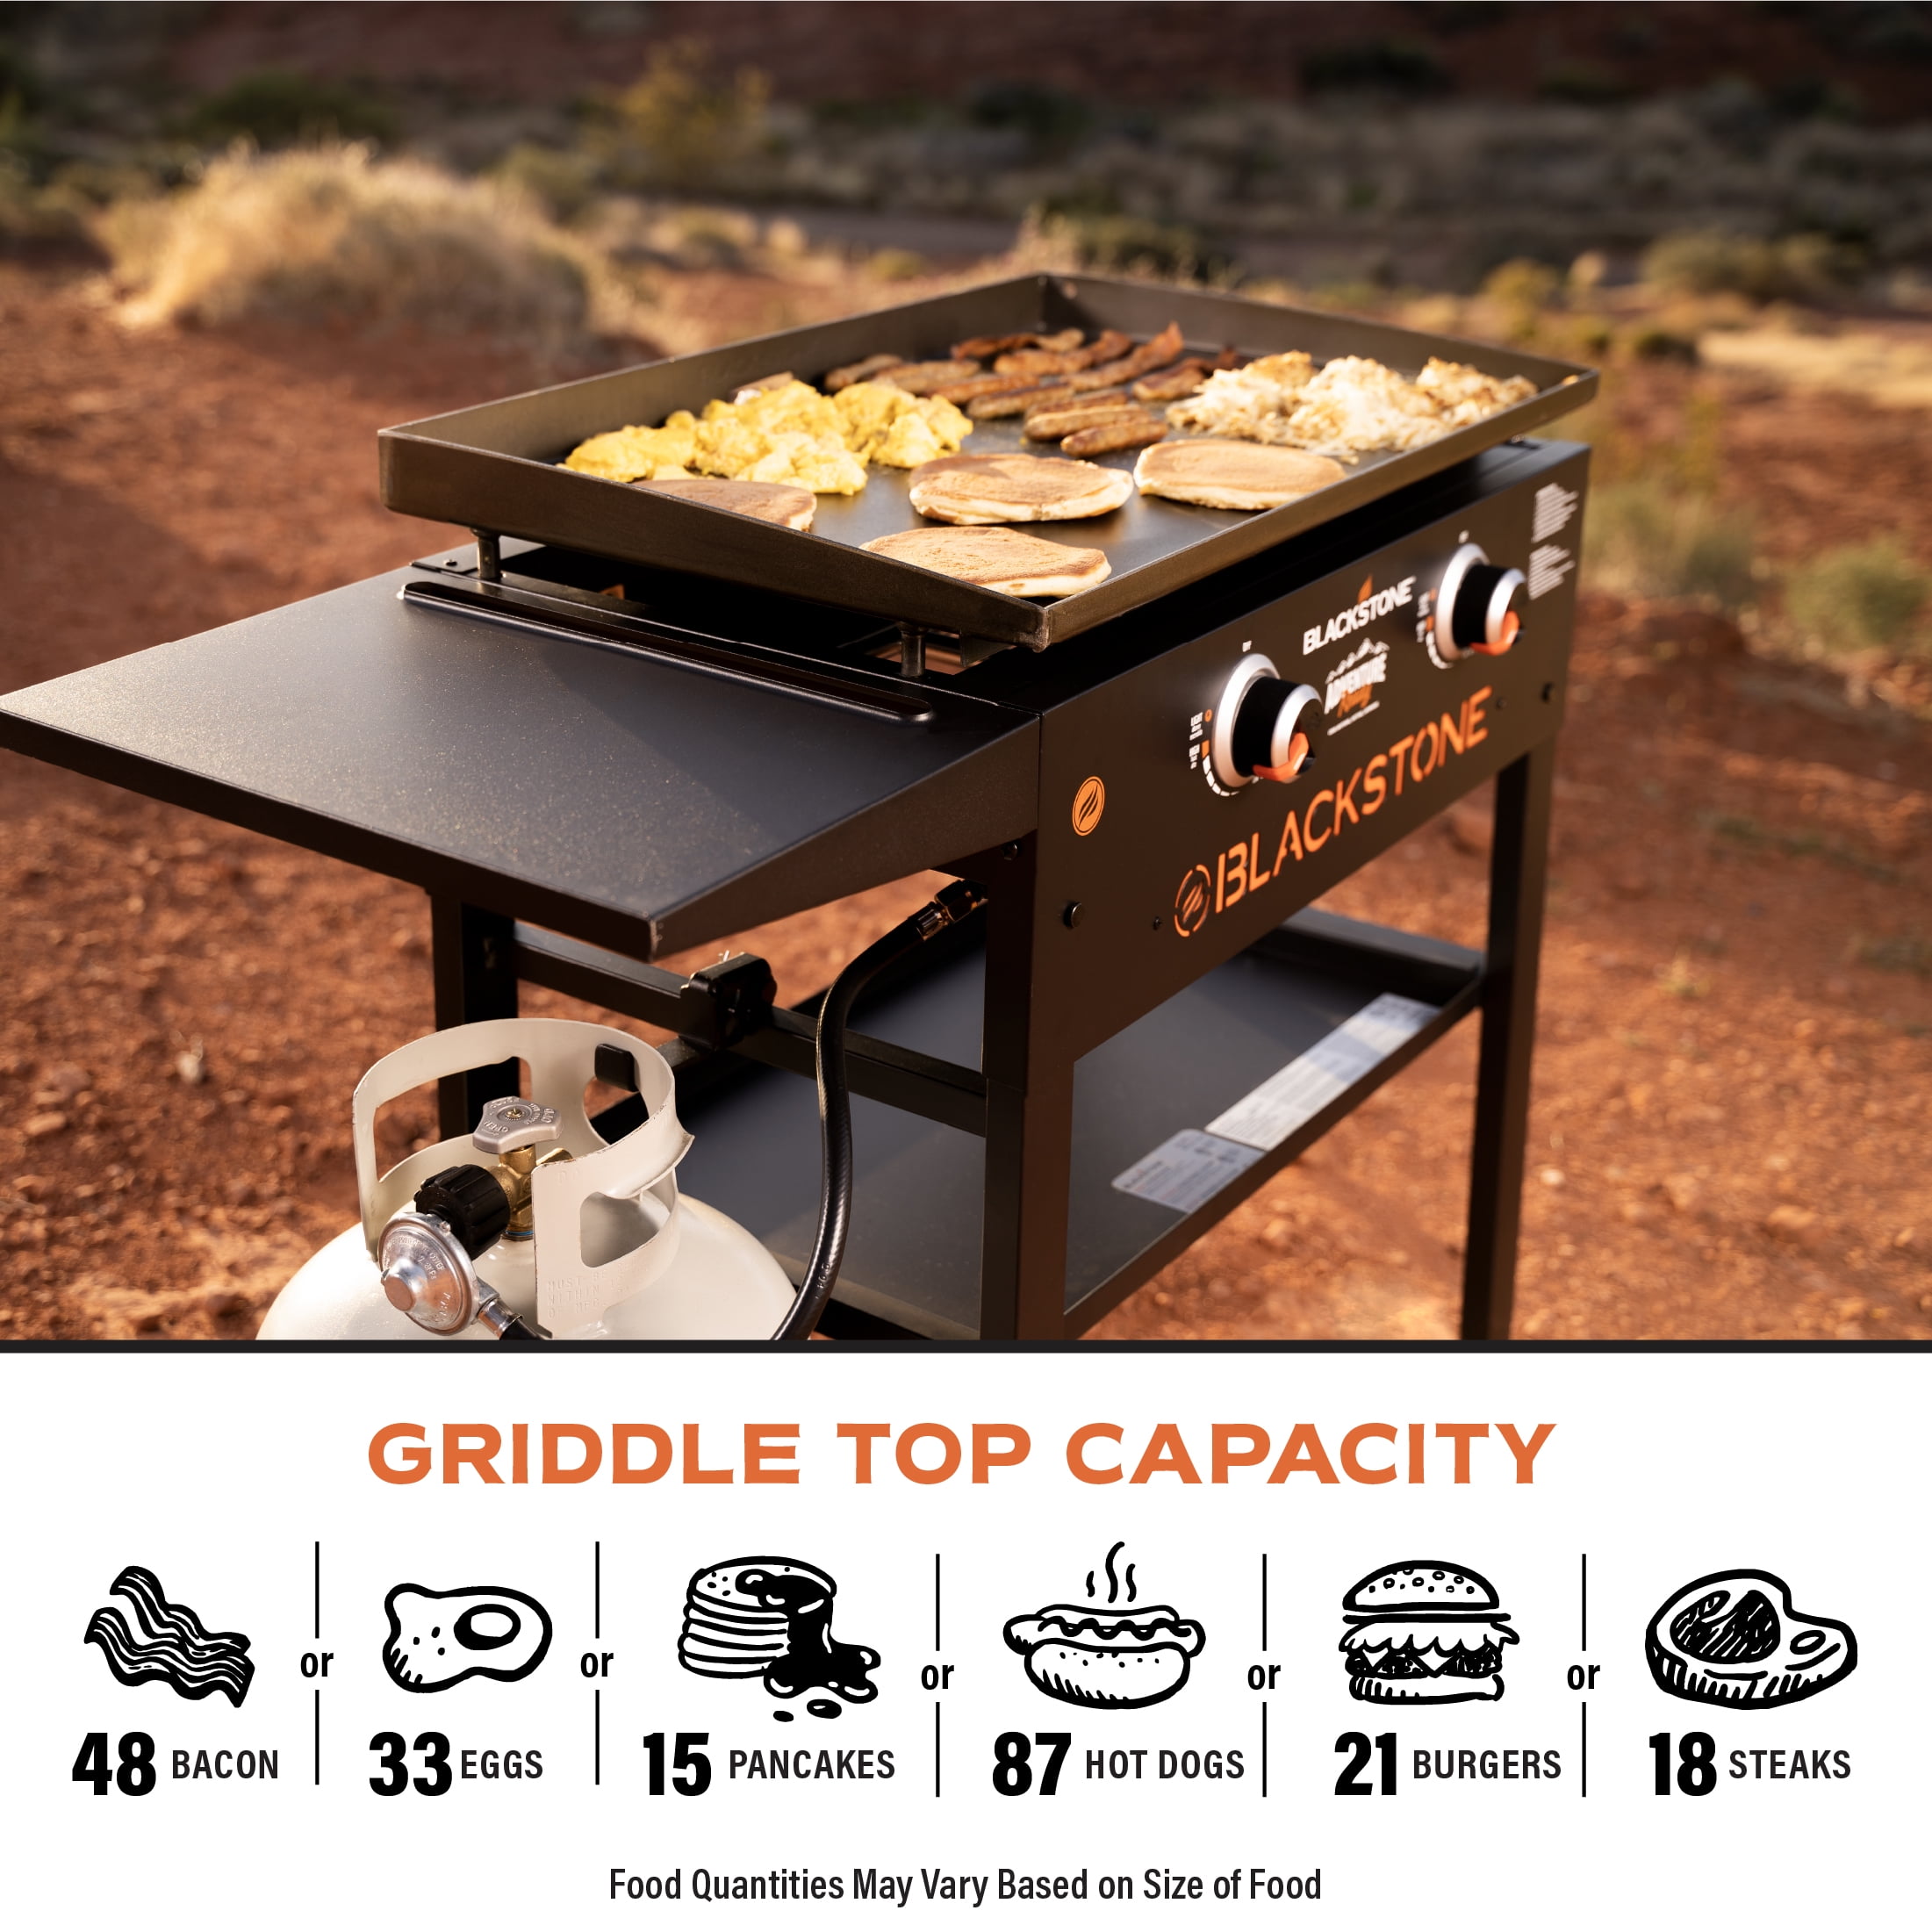 Blackstone 28 in. 2-Burner Propane Gas Griddle (Flat Top Grill) Station in  Black with Hard Cover 1924 - The Home Depot